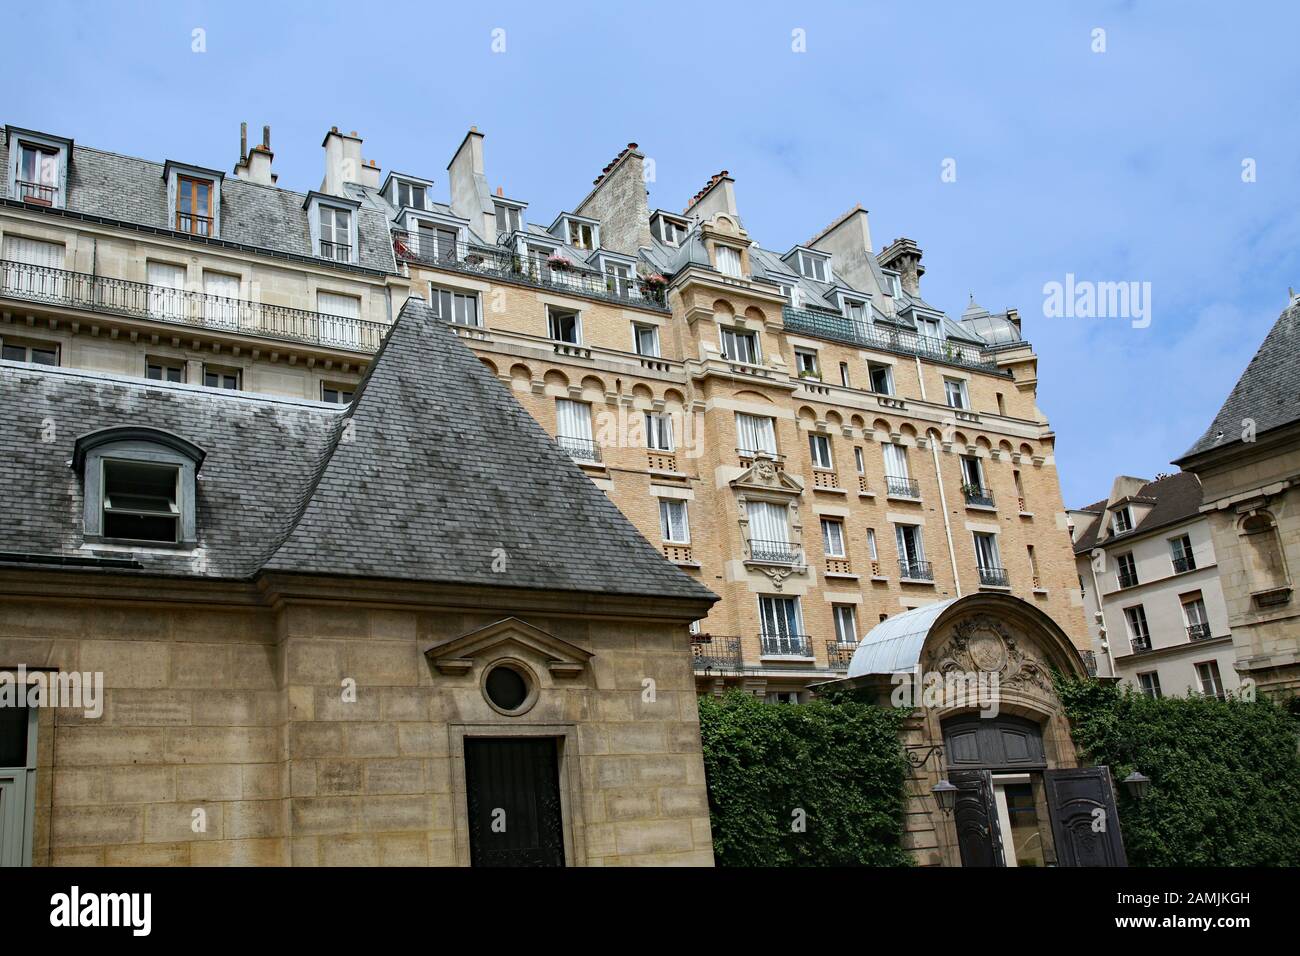 Paris, residential district with traditional apartment buildings with baroque style details and slate roofs Stock Photo